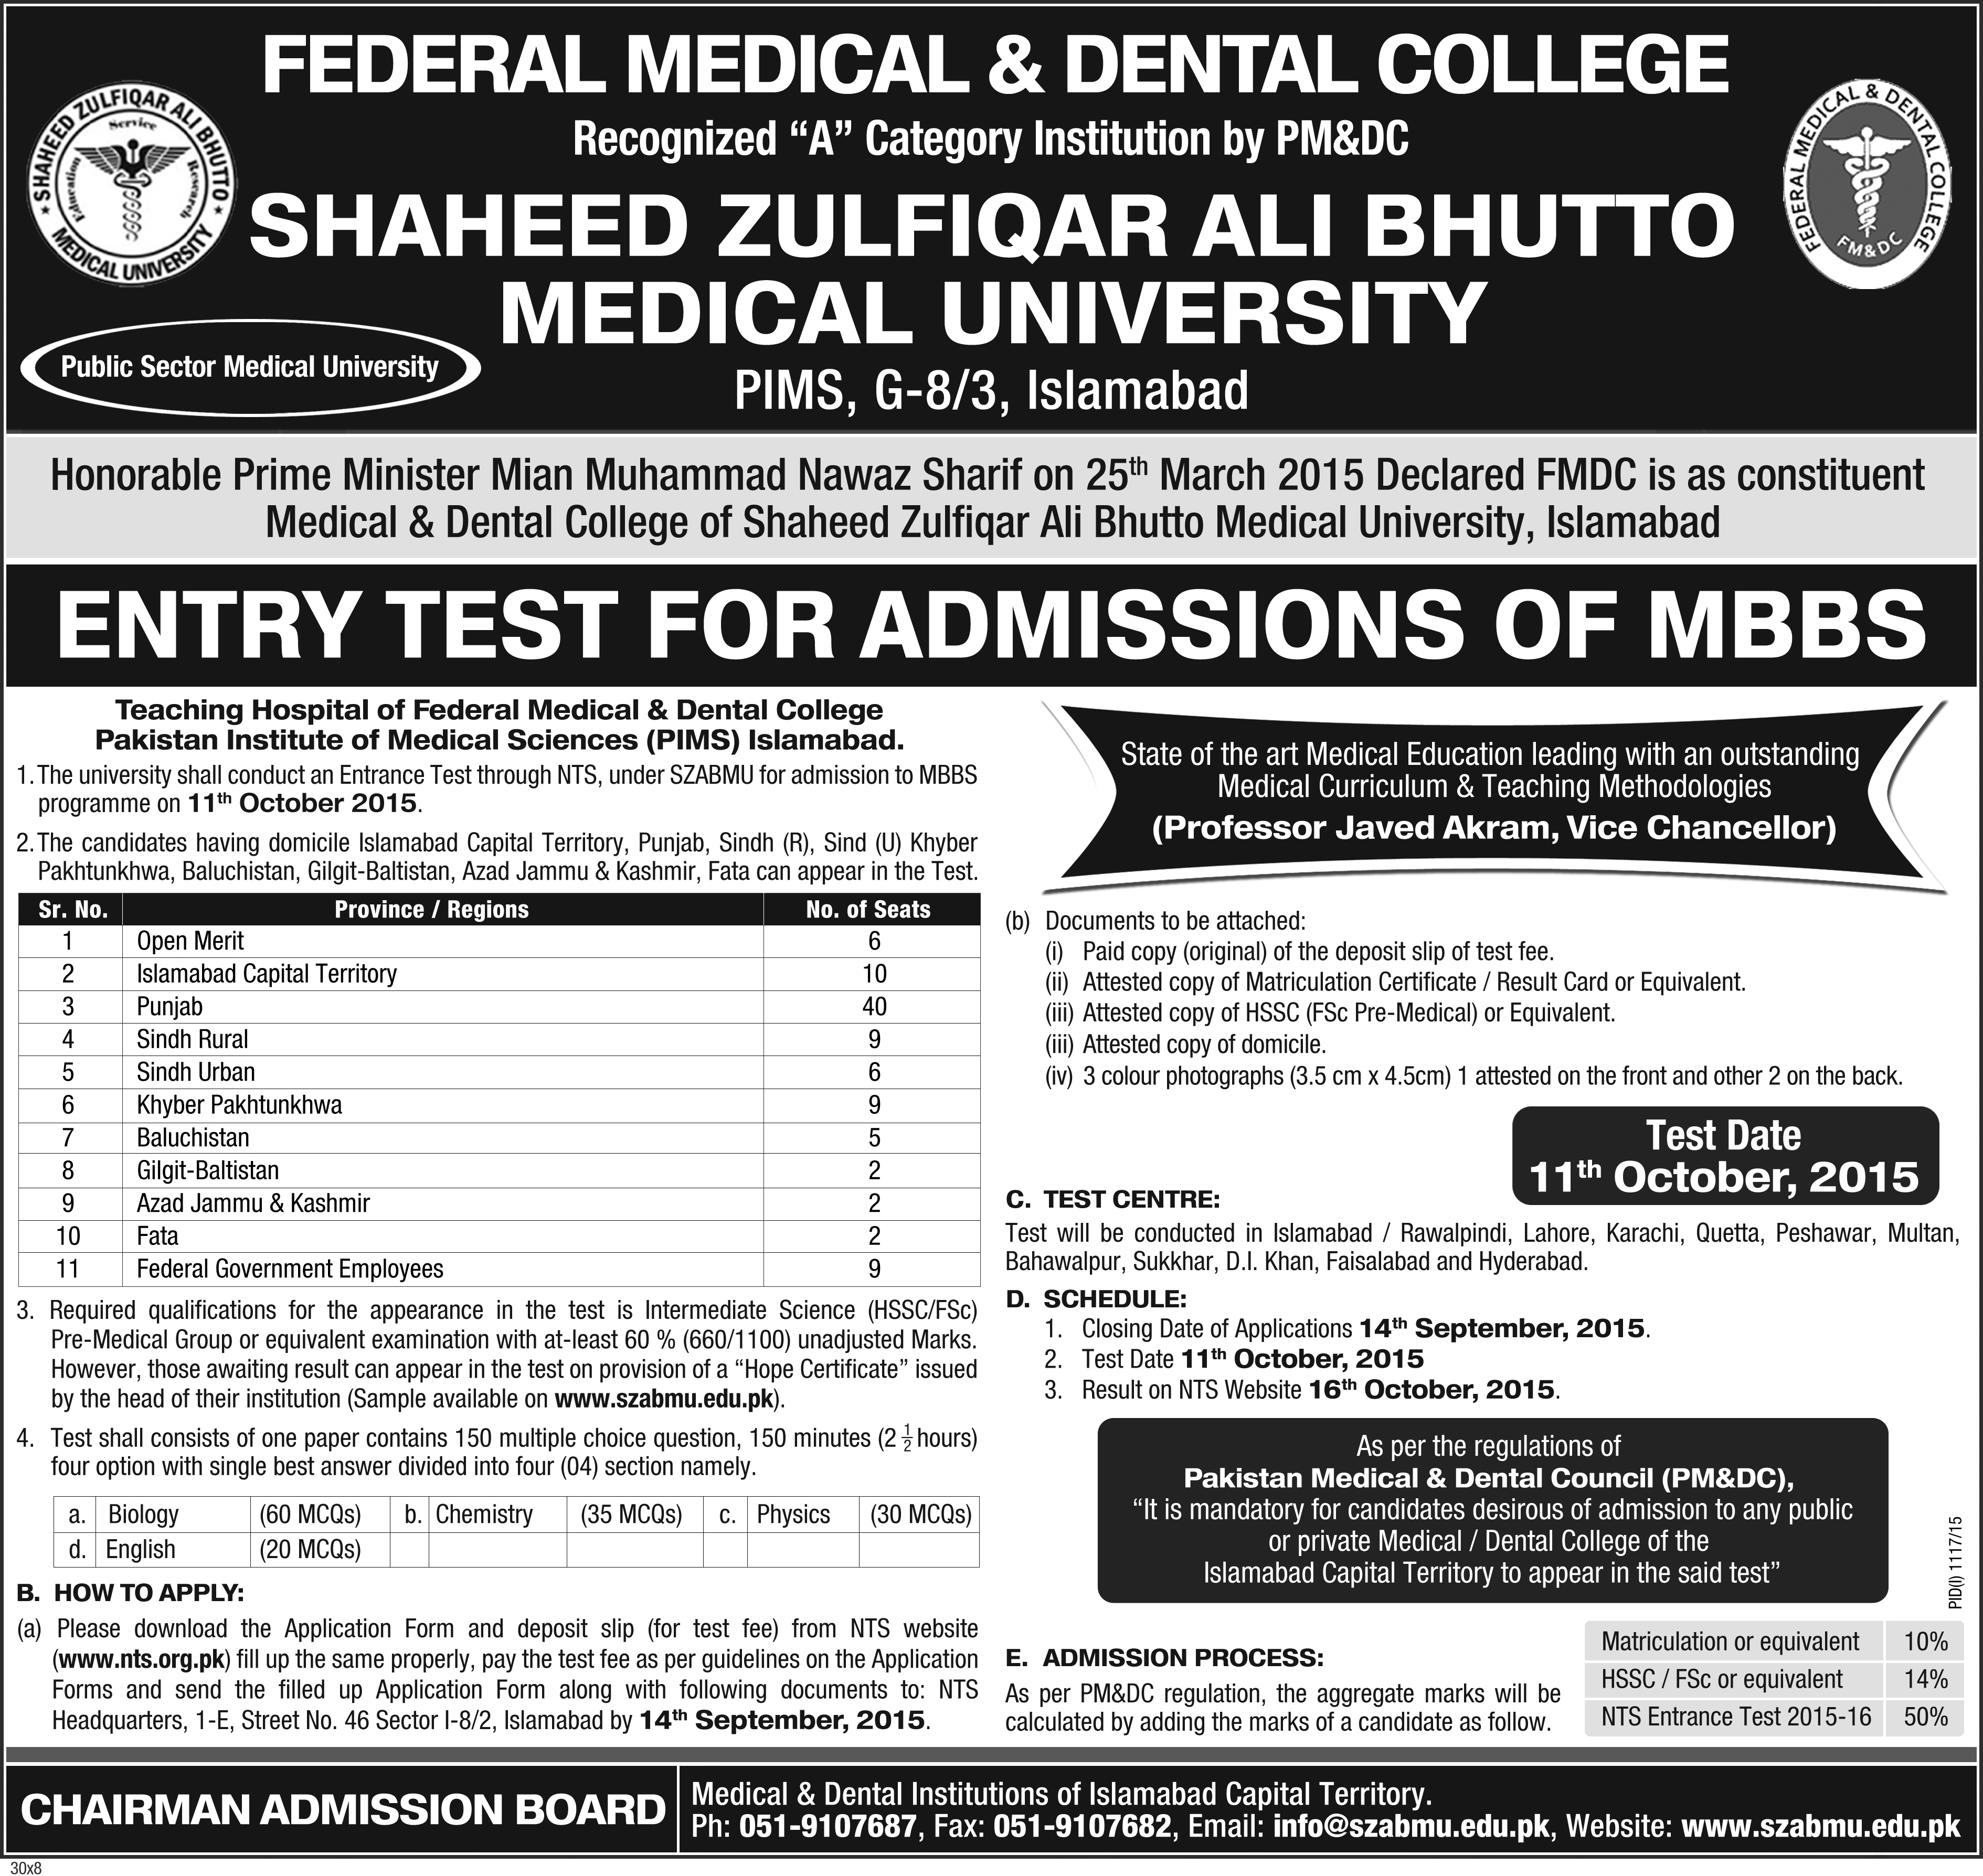 Federal Medical and Dental College (FMDC) announces admissions for MBBS 2015 - Download application form and admission procedure